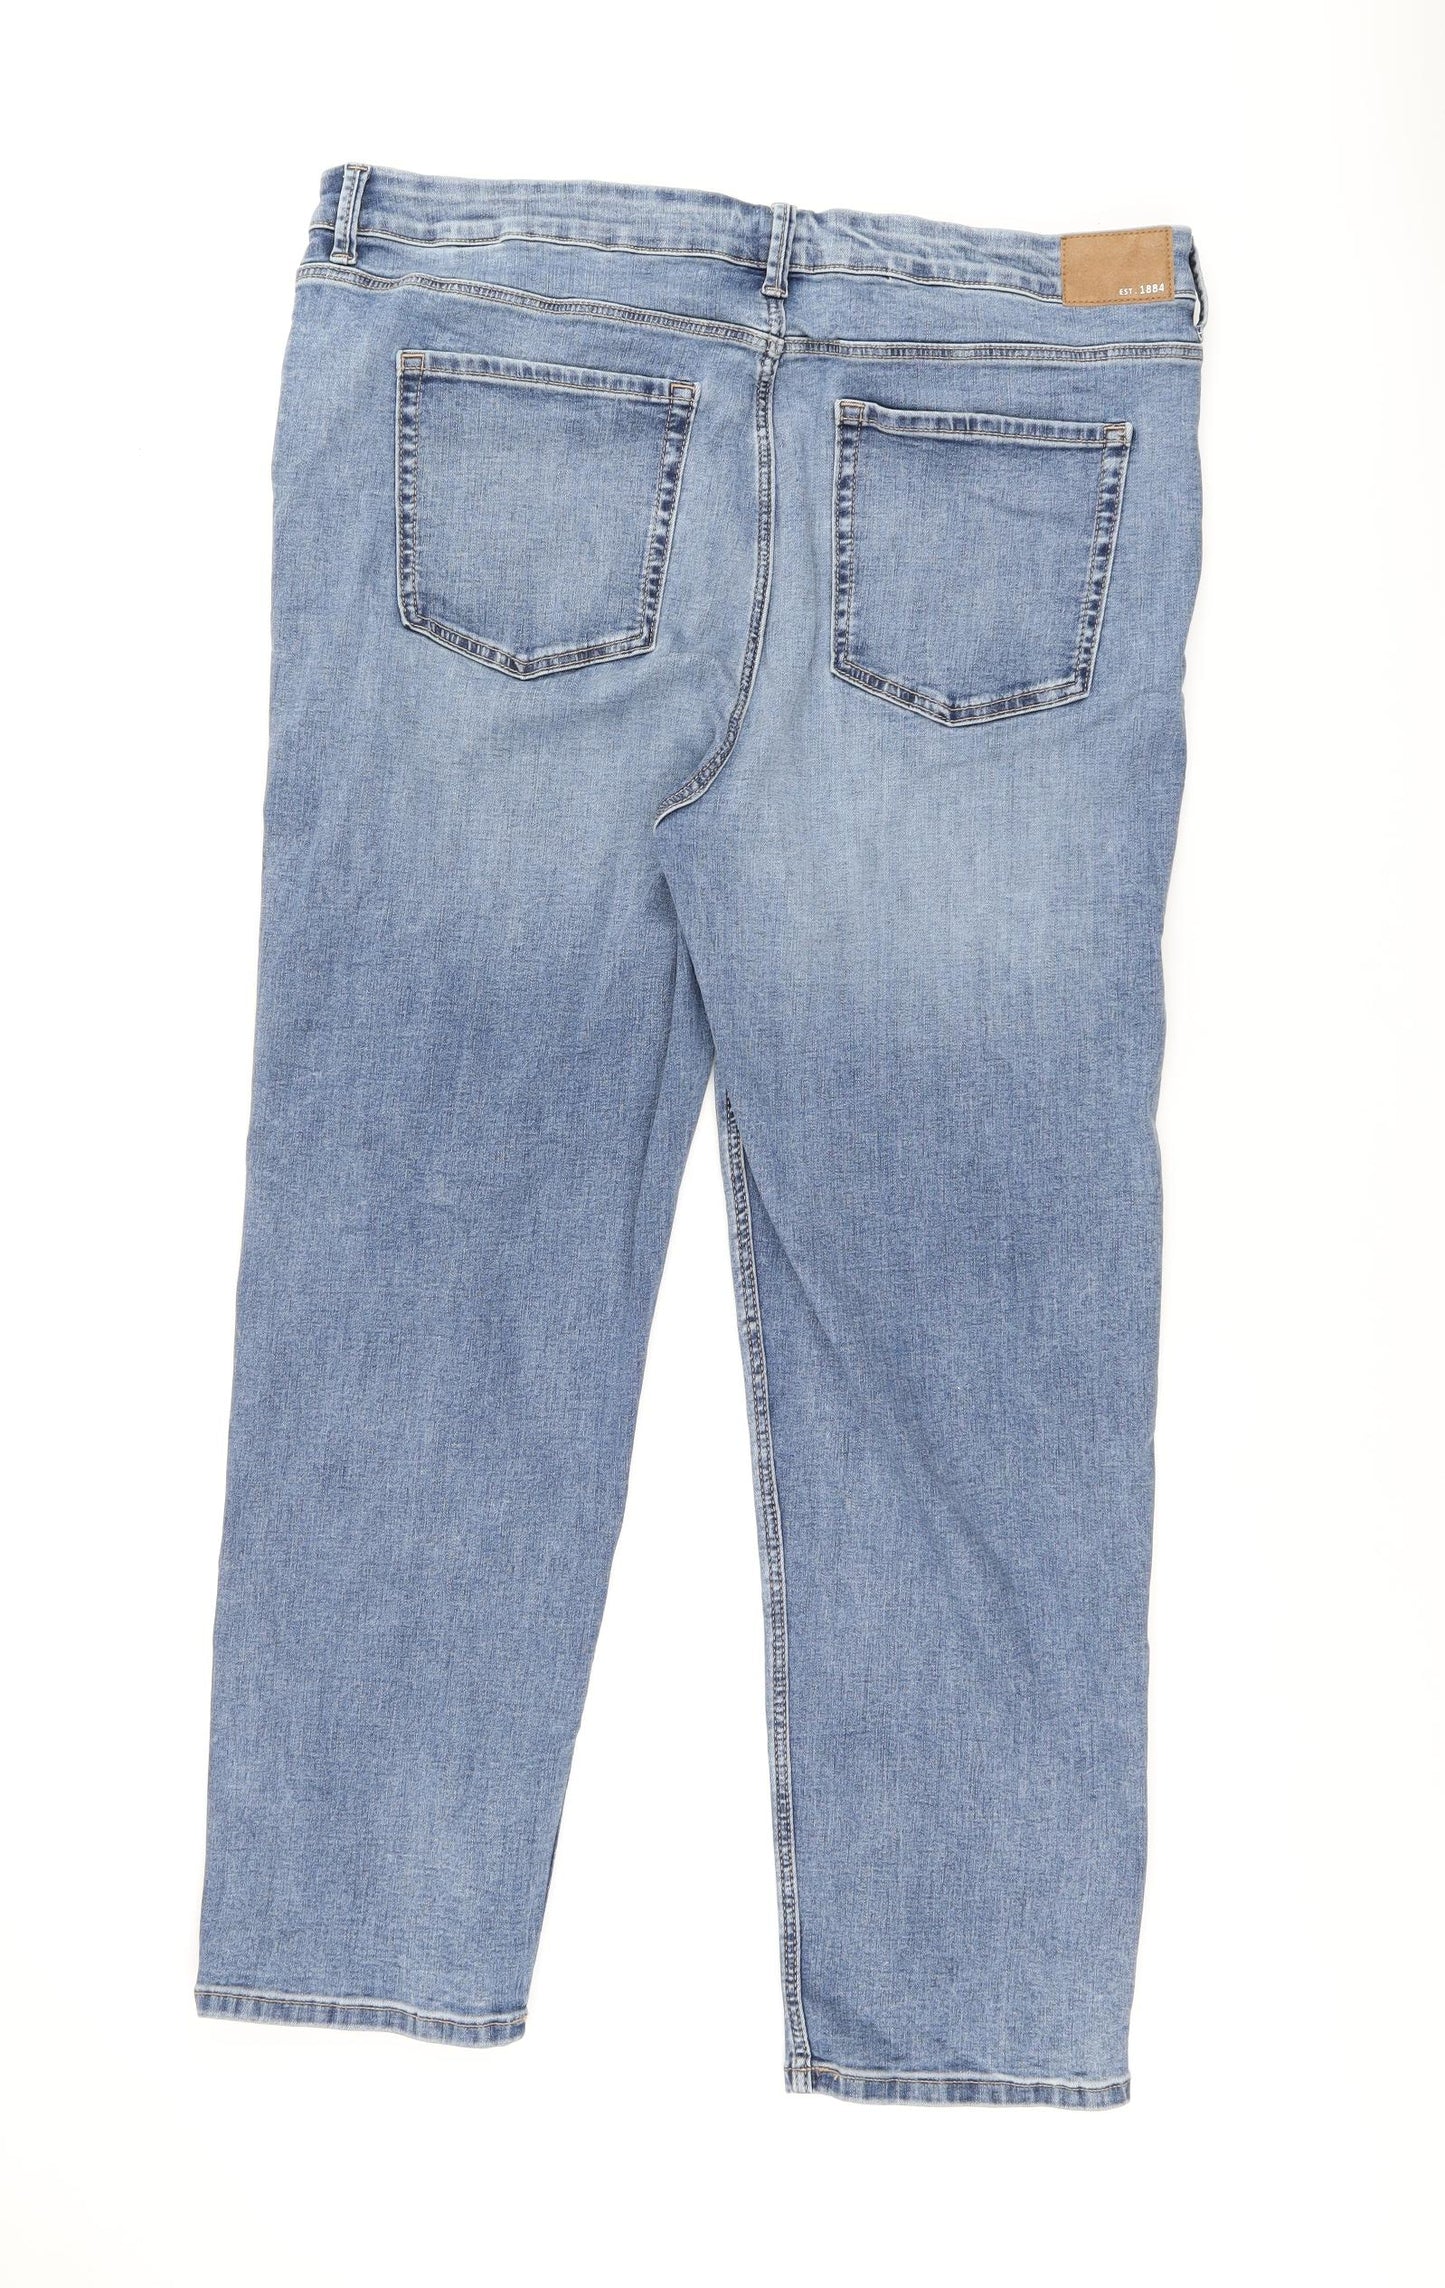 Marks and Spencer Womens Blue Cotton Straight Jeans Size 20 L27 in Regular Zip - Short leg